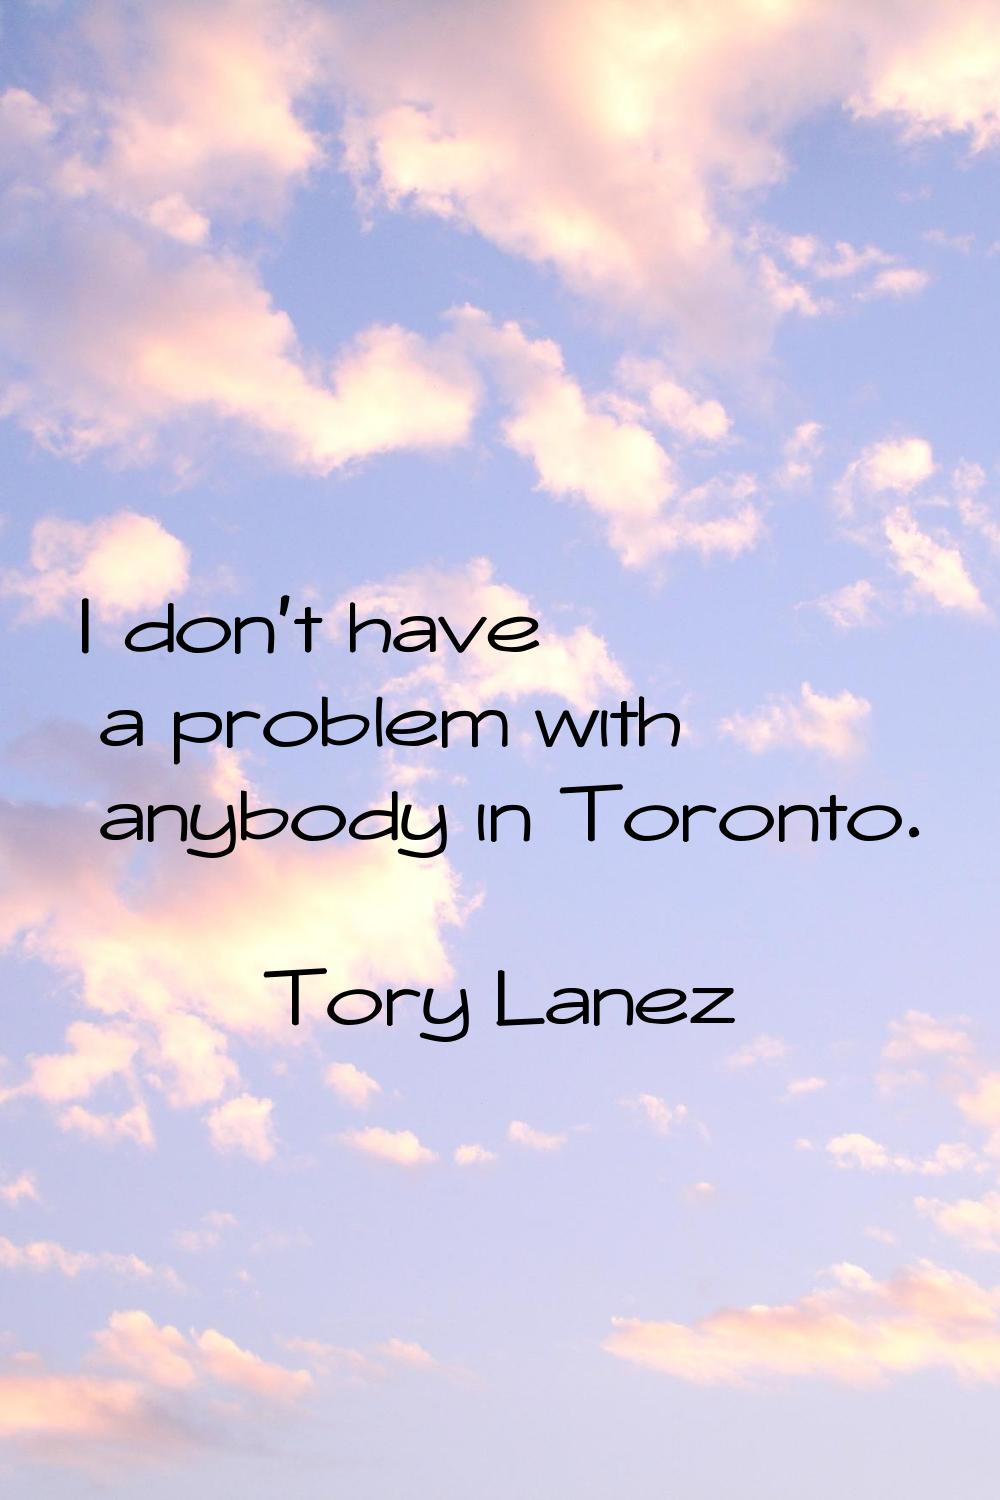 I don't have a problem with anybody in Toronto.